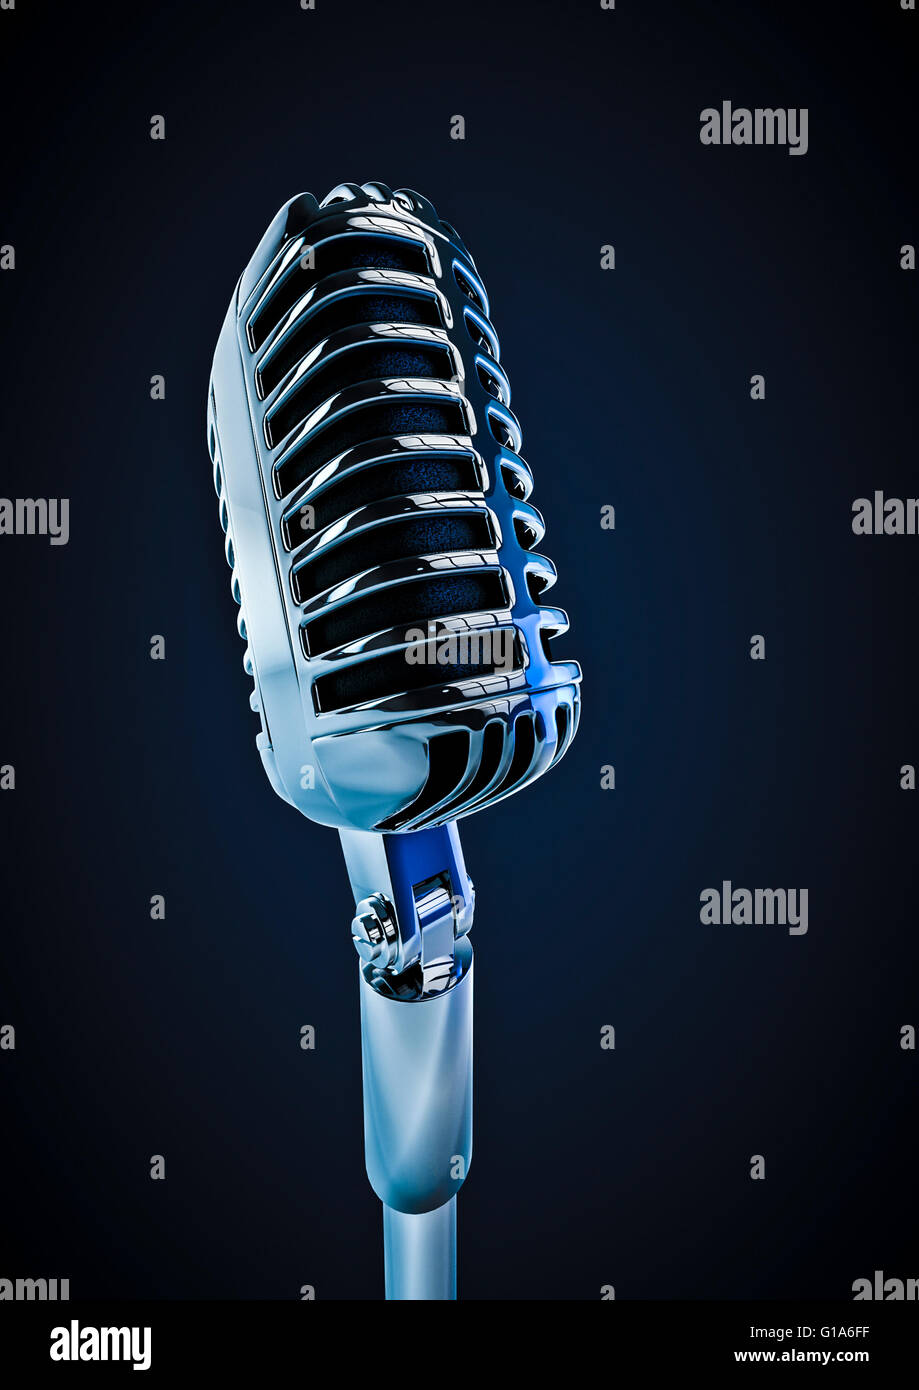 Retro microphone / 3D render of old fashioned classic microphone Stock Photo